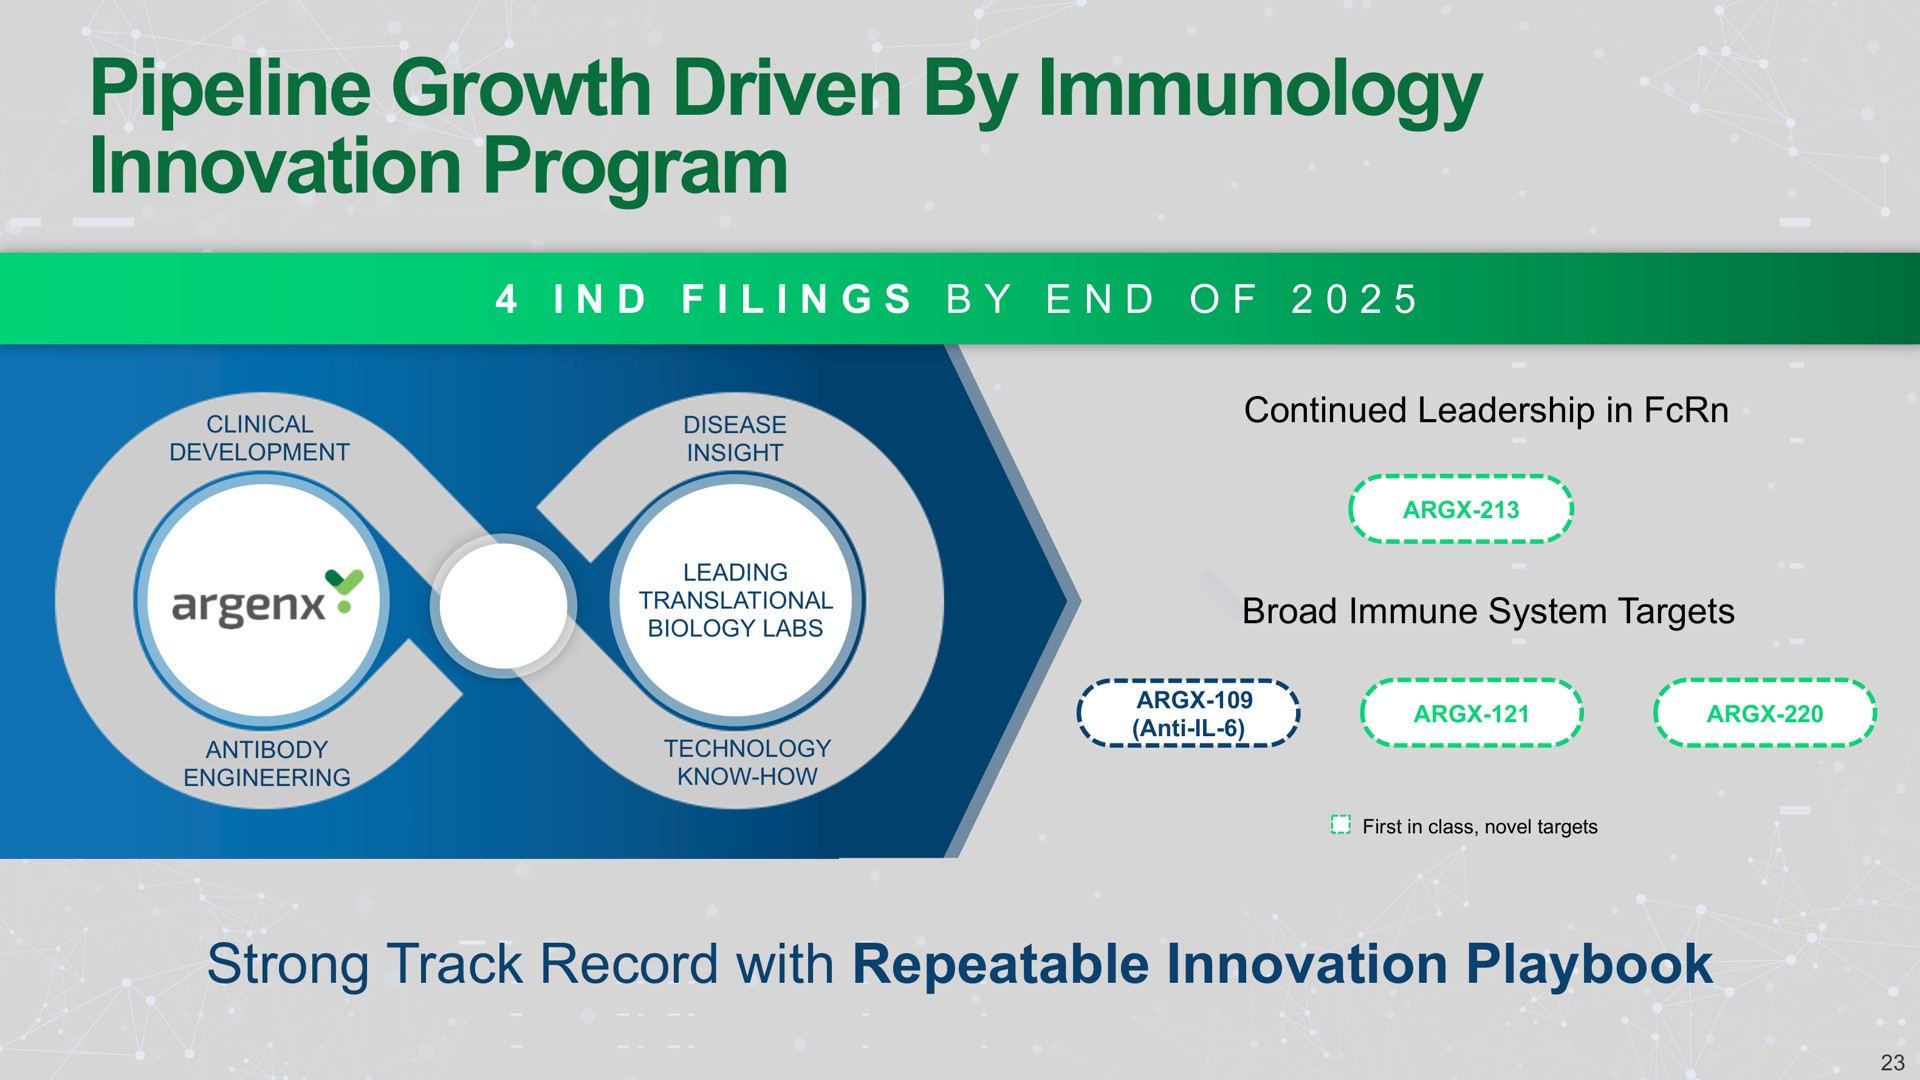 pipeline growth driven by immunology innovation program | argenx SE